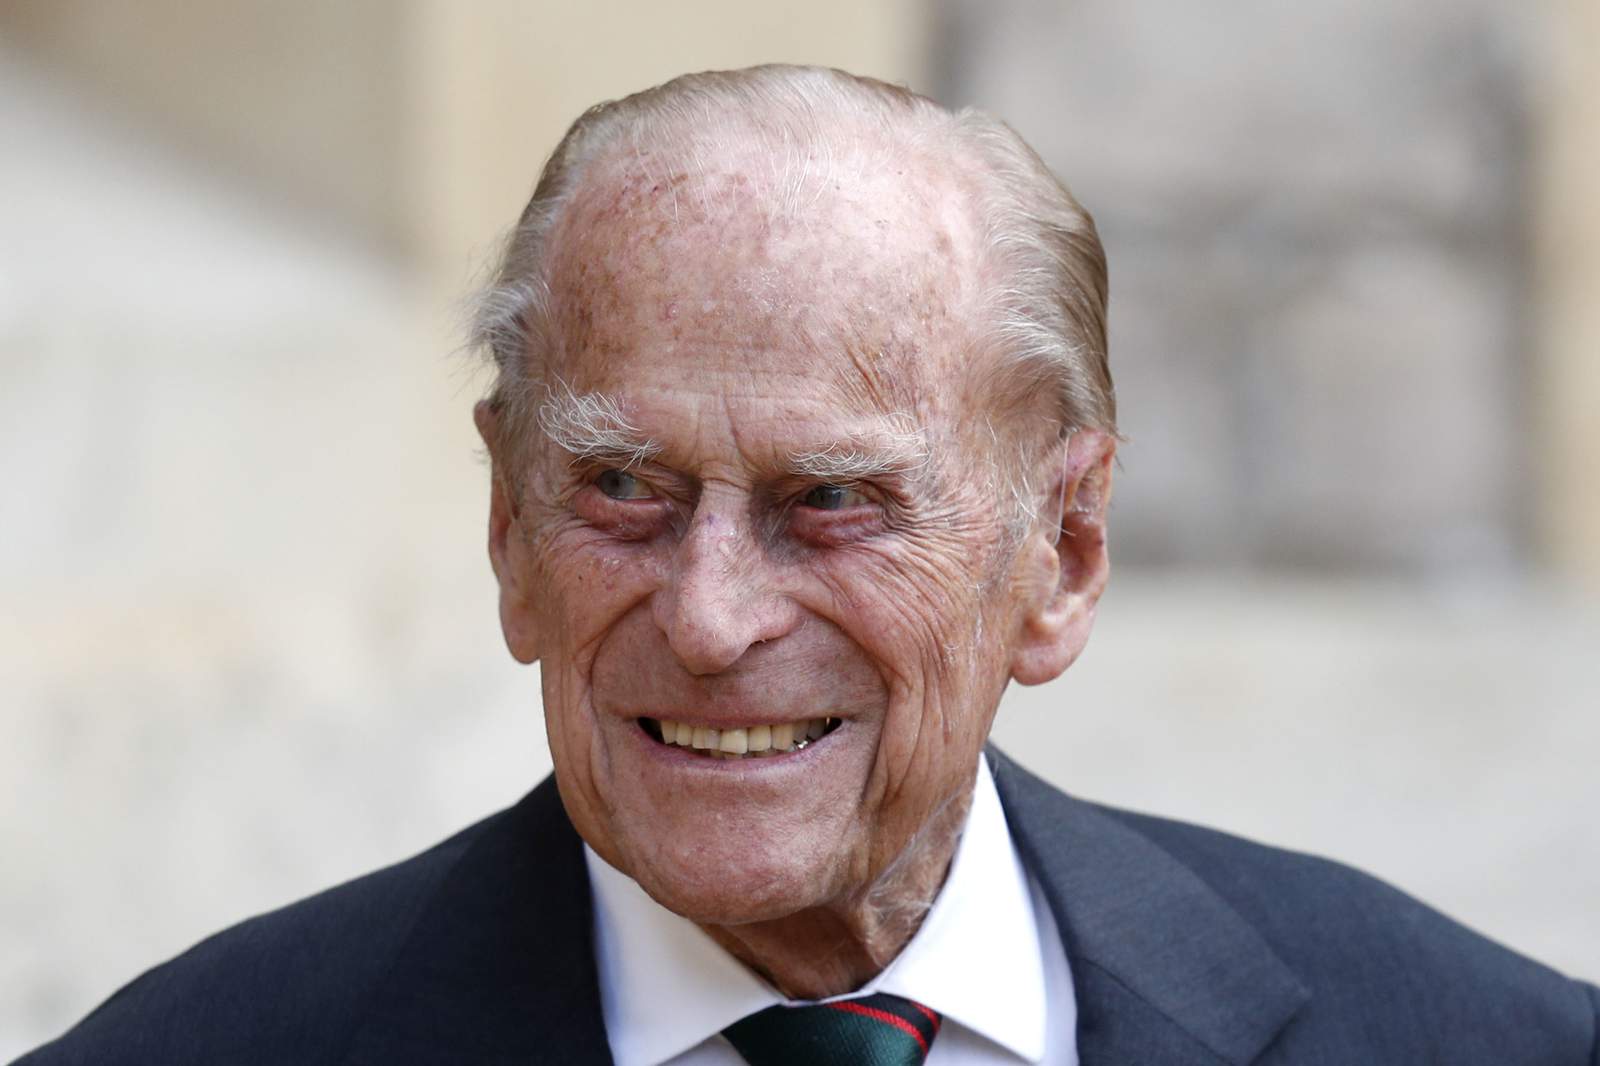 British queen’s husband, 99-year-old Prince Philip, admitted to hospital